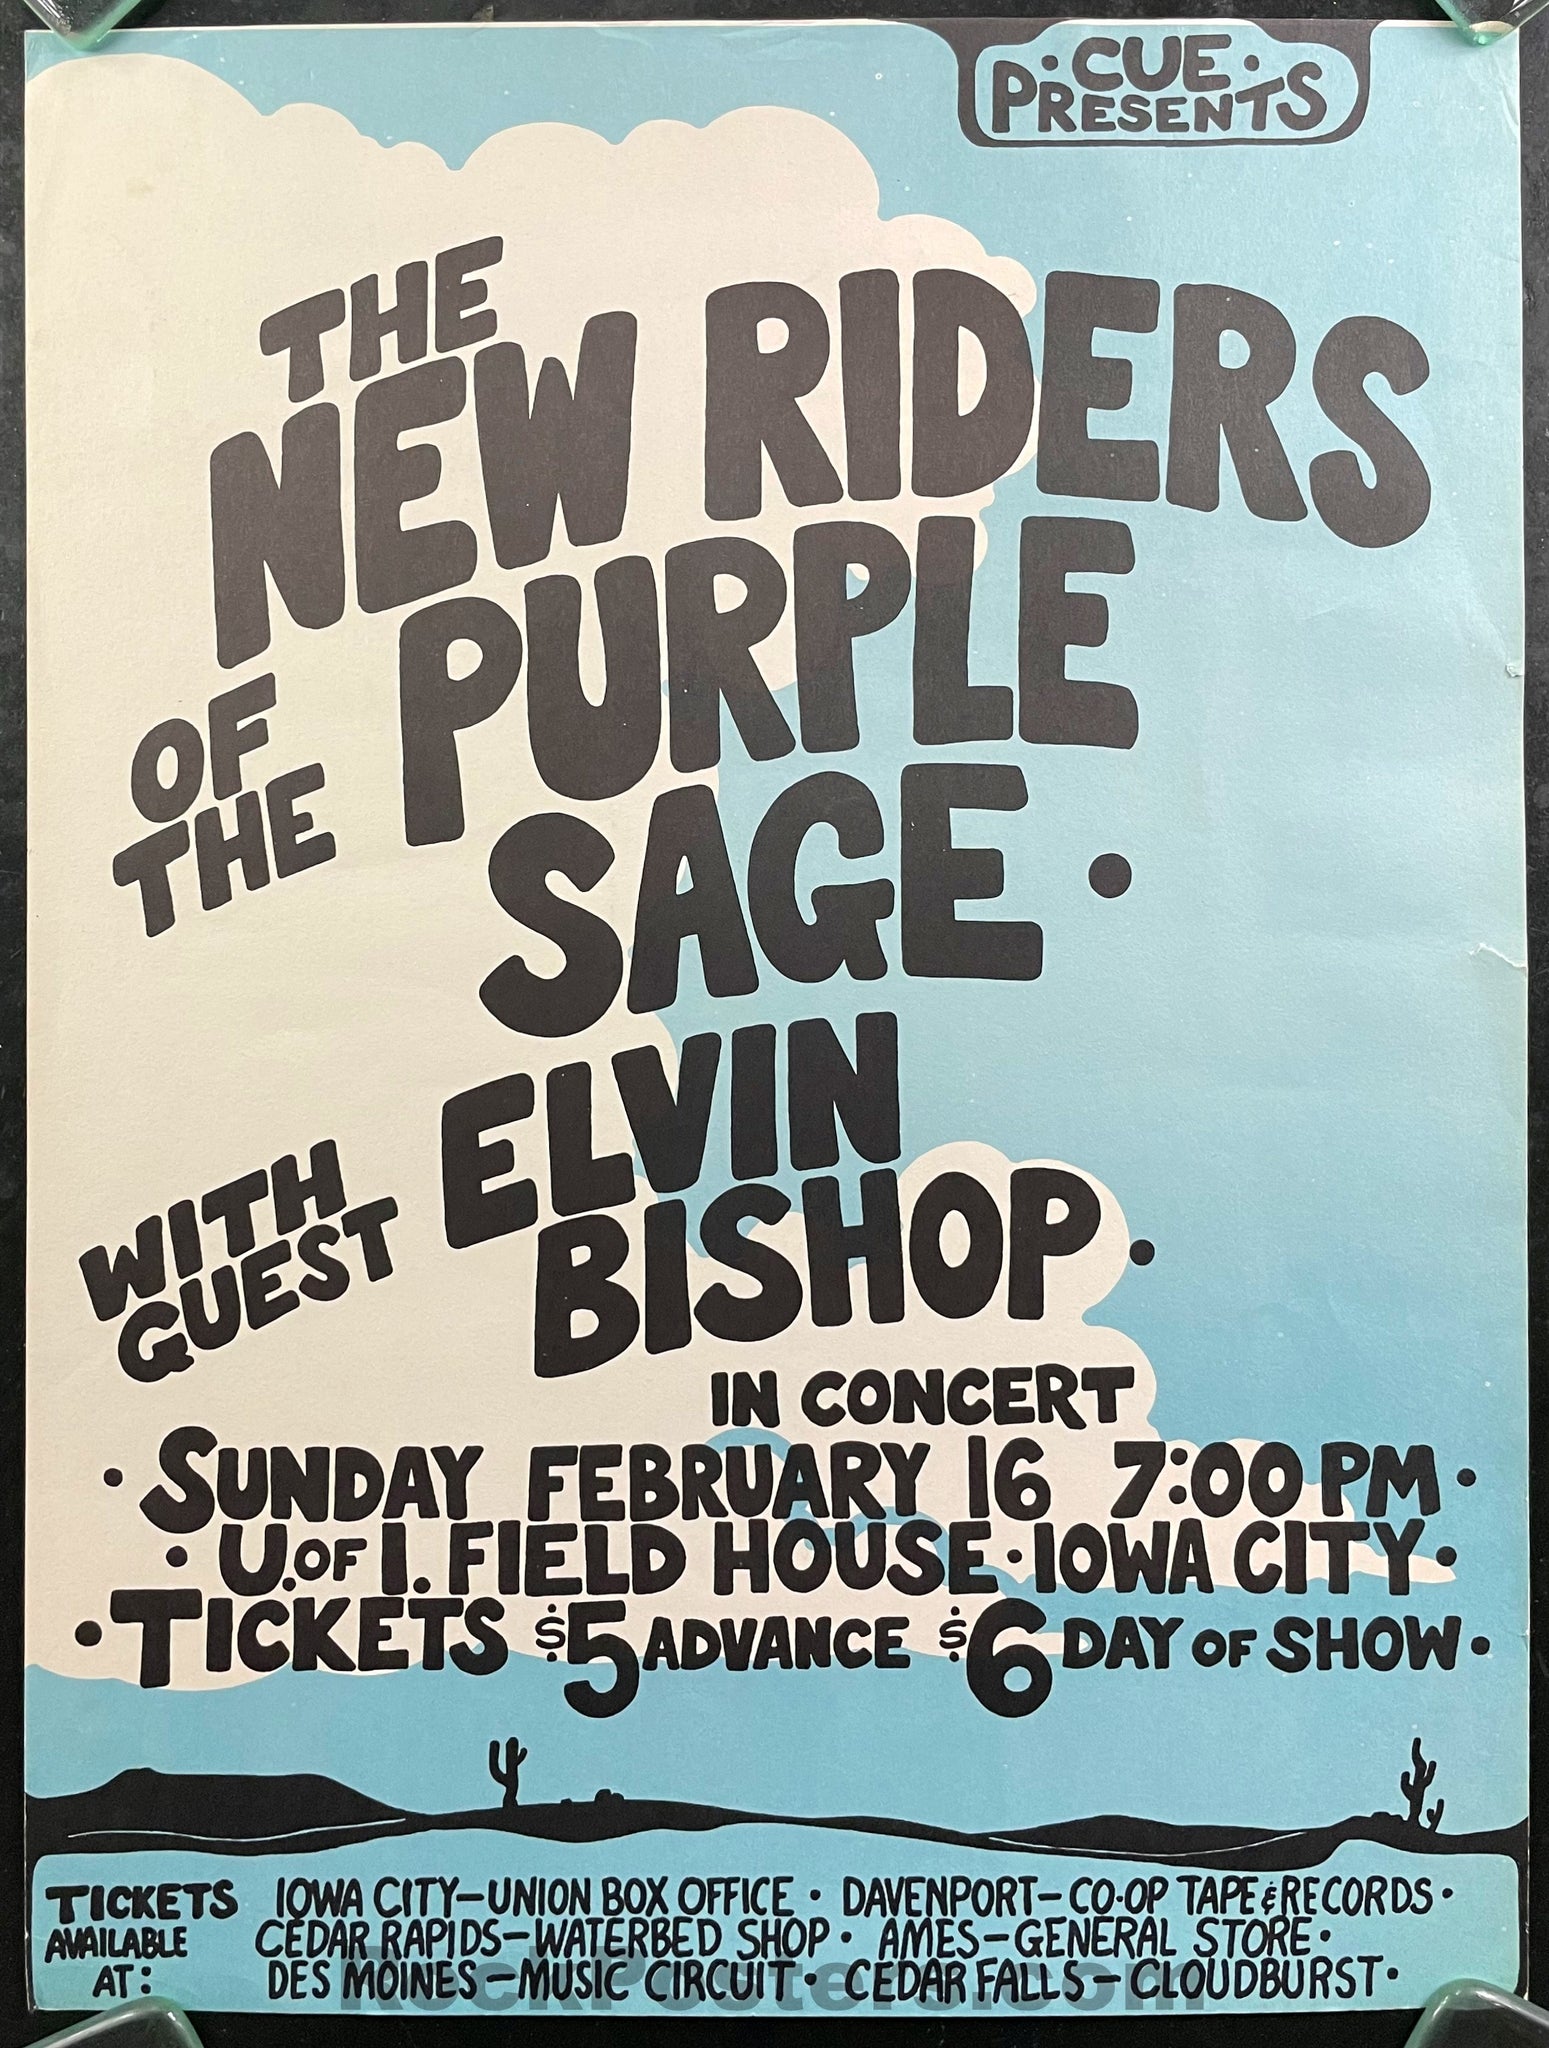 AUCTION - New Riders of Purple Sage - 1975 Poster - Iowa City - Excellent